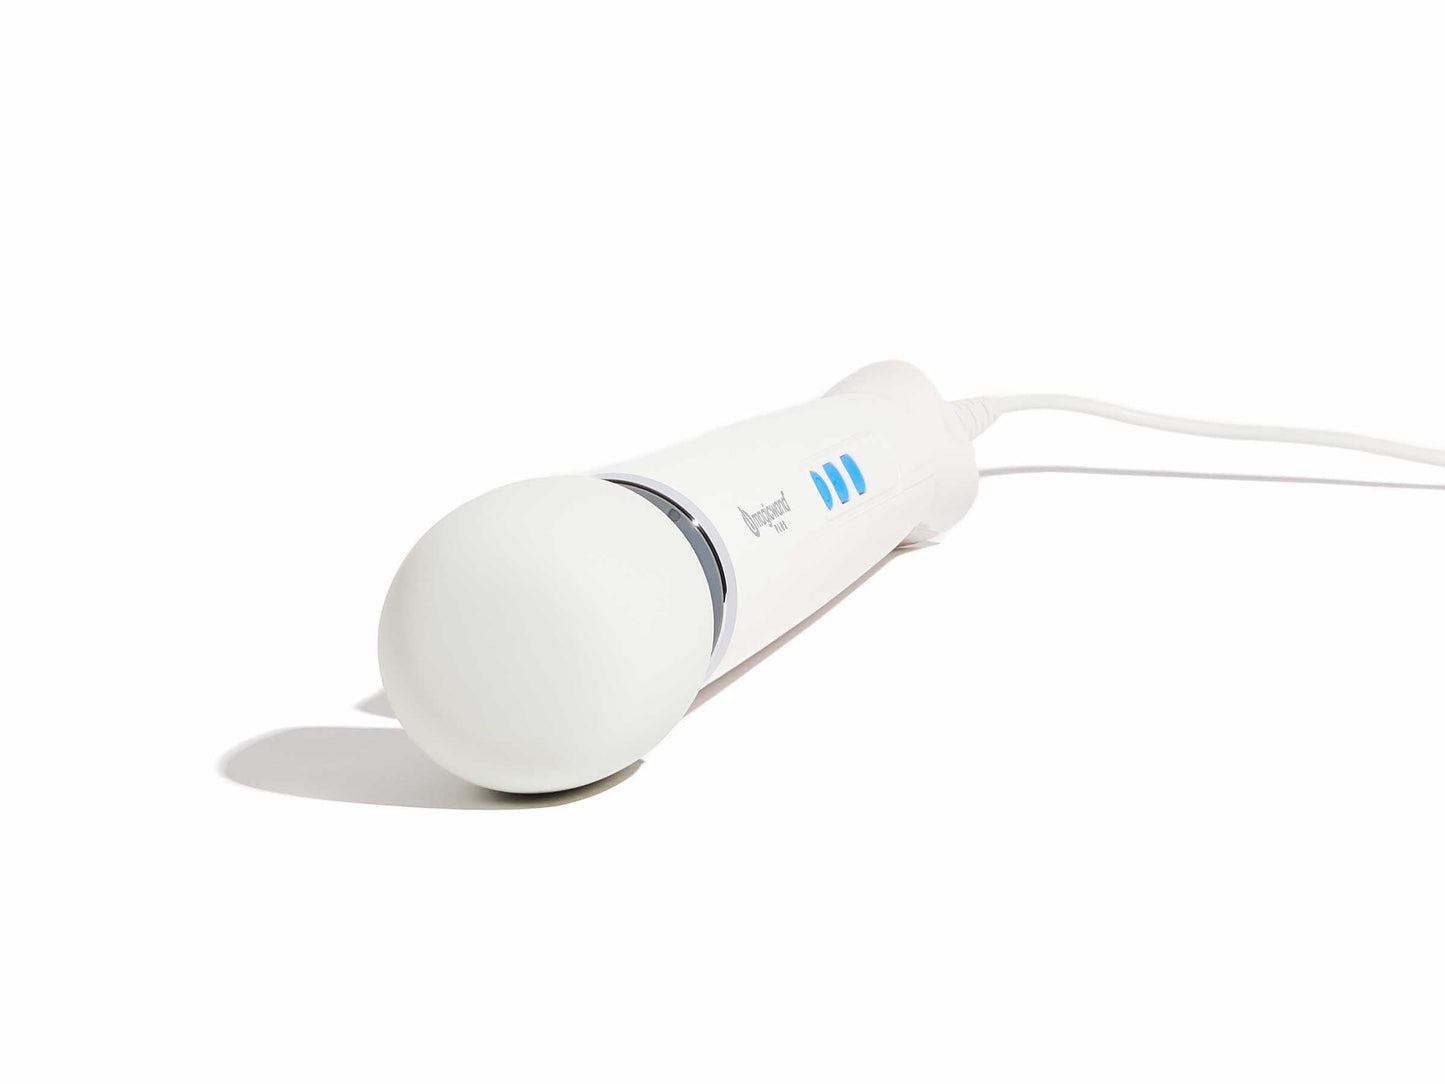 front view of the magic wand plus hv-265 multispeed vibration massager vib-hit265